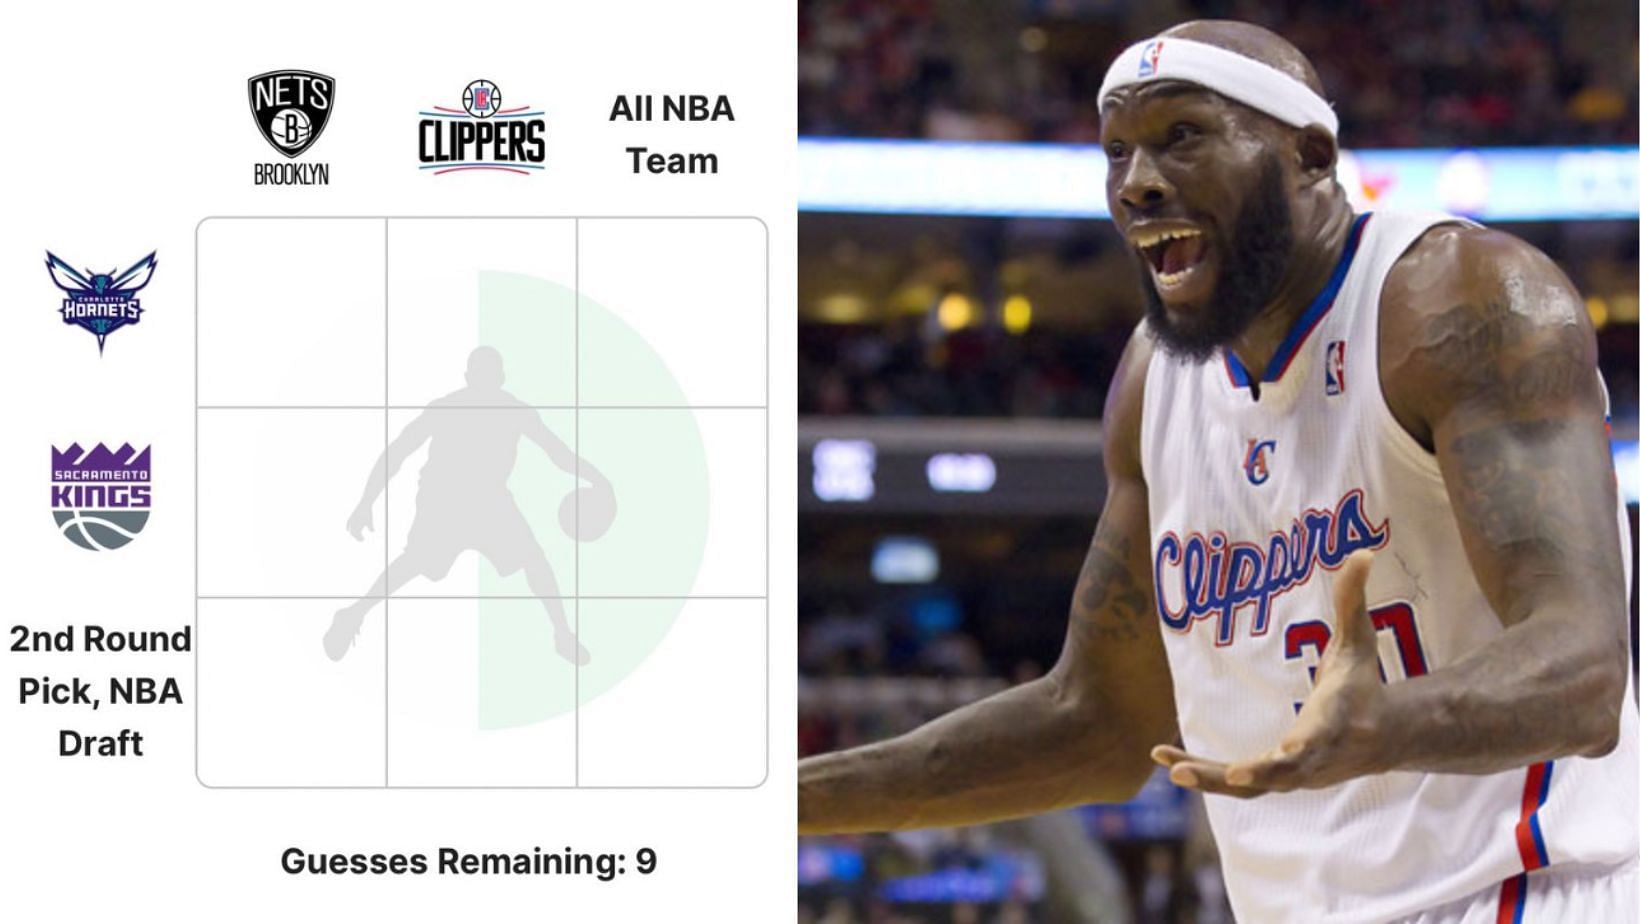 The July 25 NBA Crossover Grid has just been released.